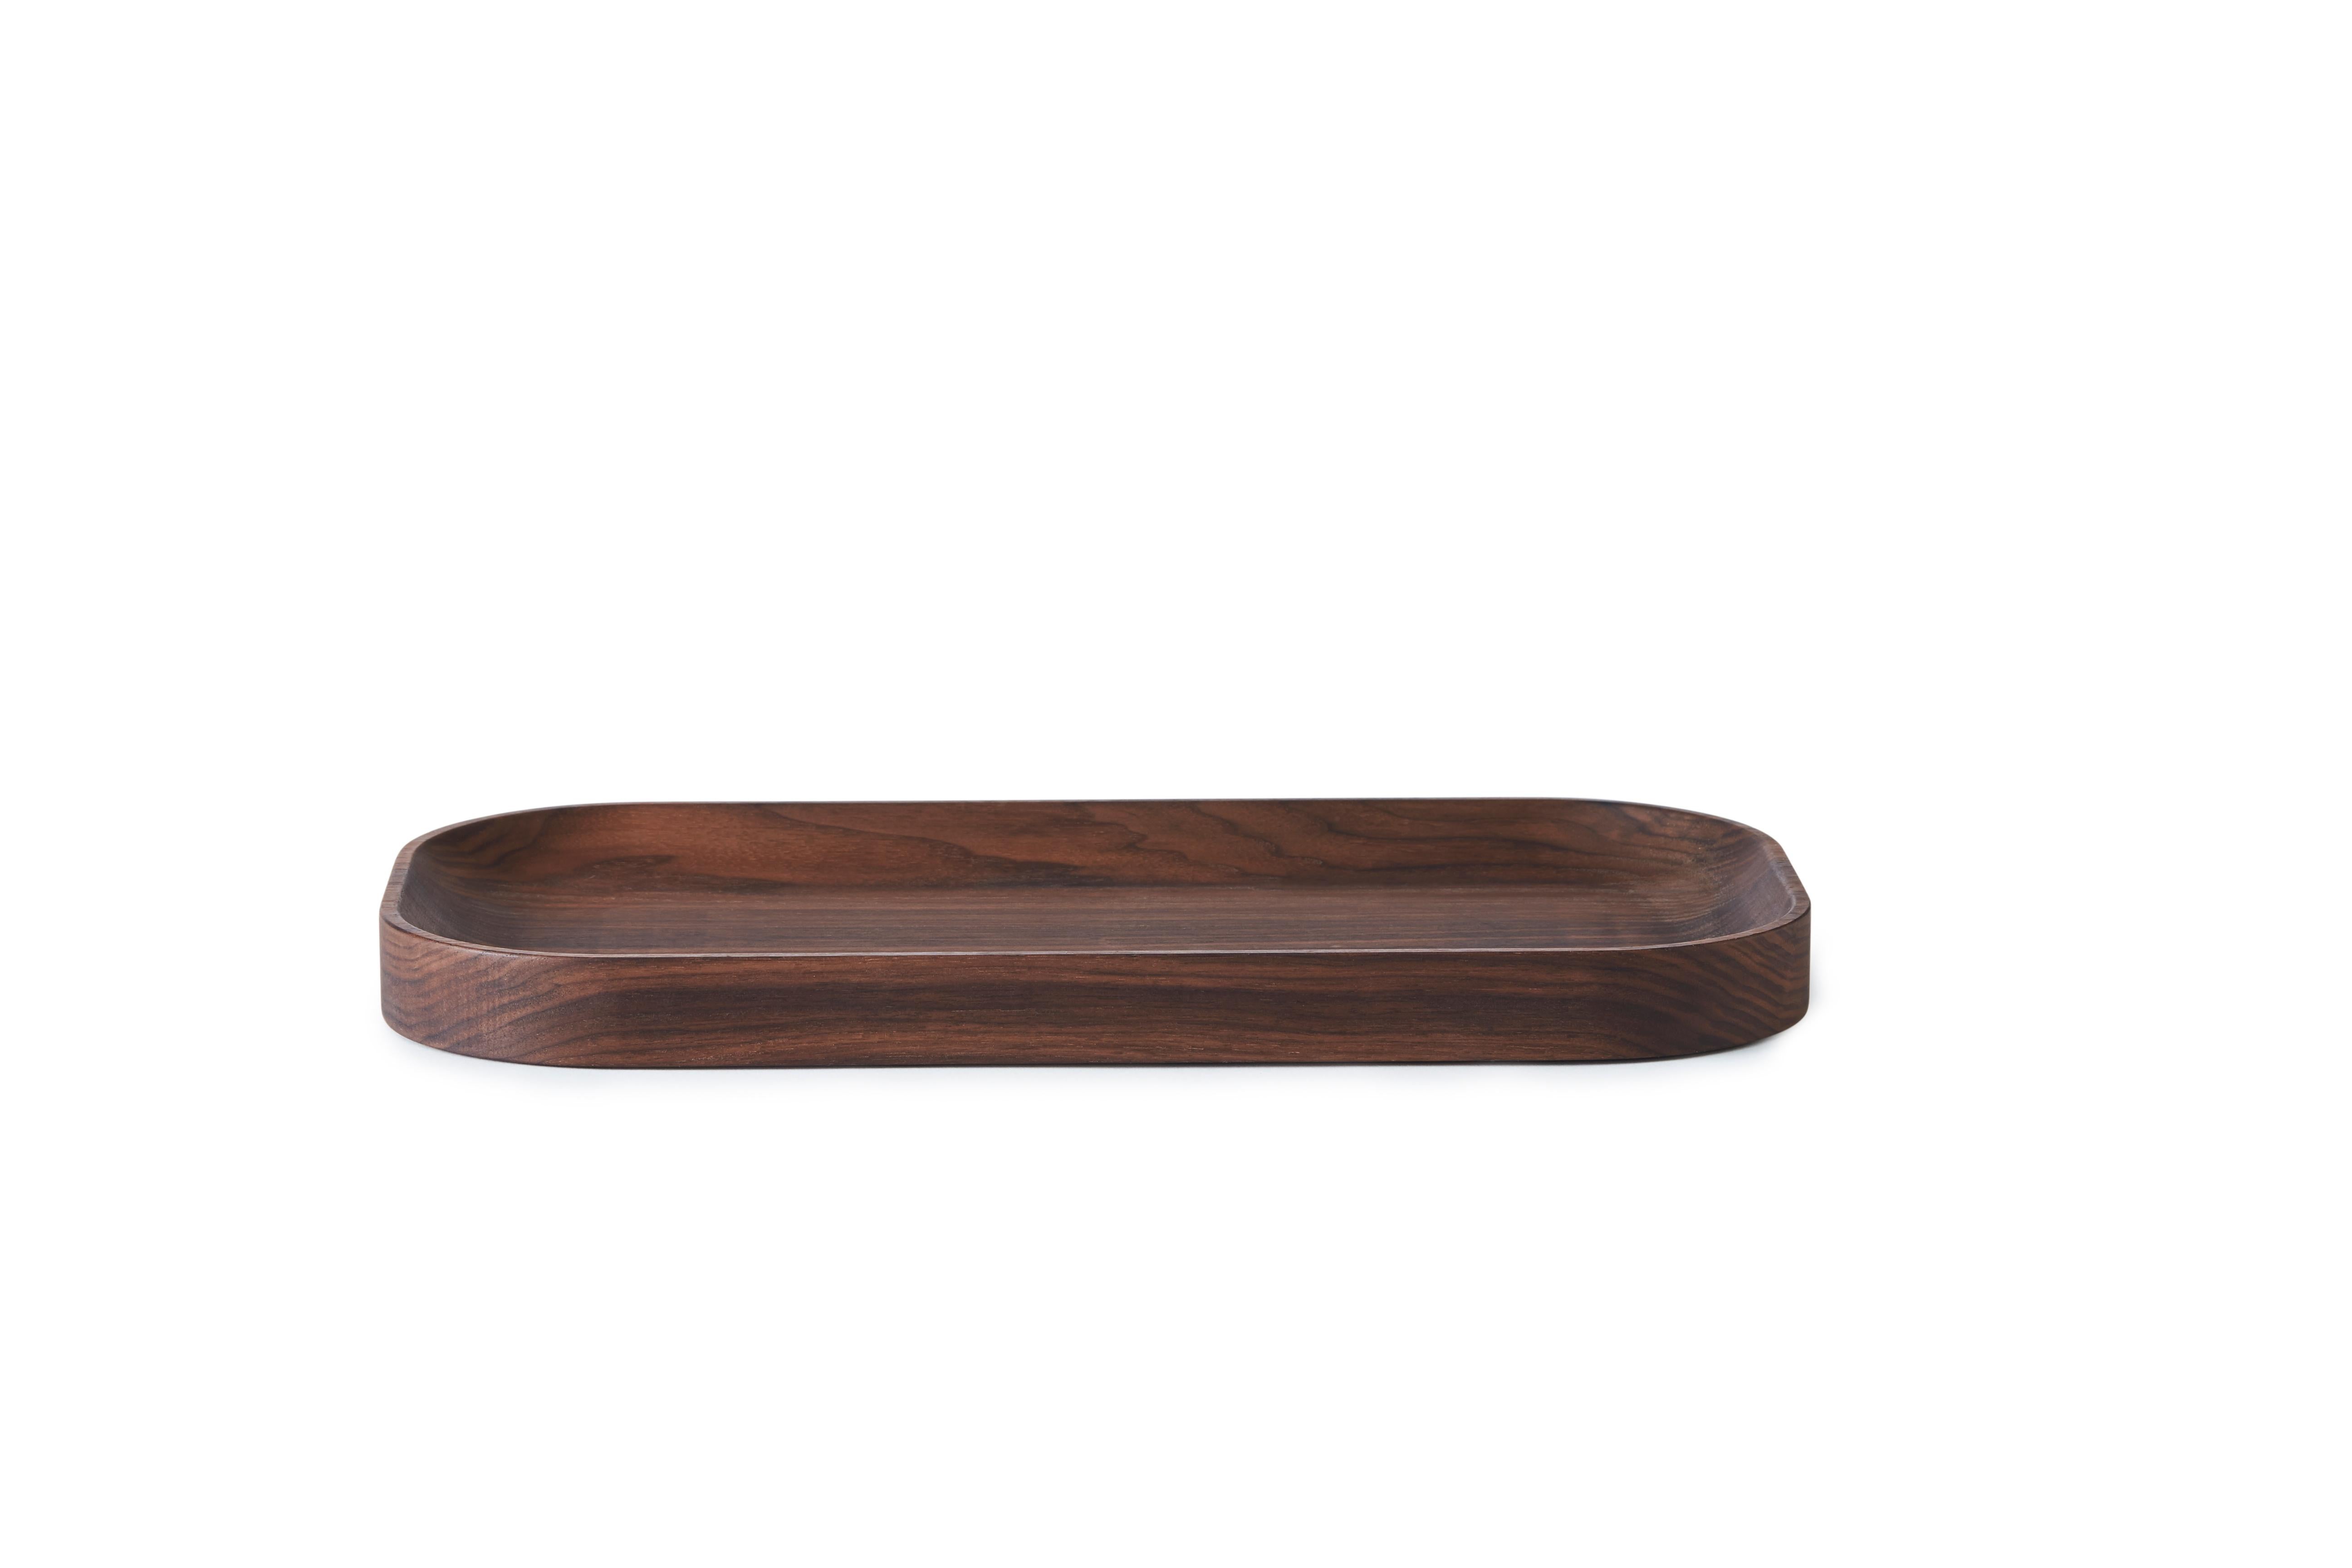 Carved wood oval tray by Warm Nordic
Dimensions: D40 x W20 x H3 cm
Material: oiled solid walnut
Weight: 0.9 kg 
Also available in different variations. 

Exquisite wooden trays with an organic design and understated elegance. The Carved Wood